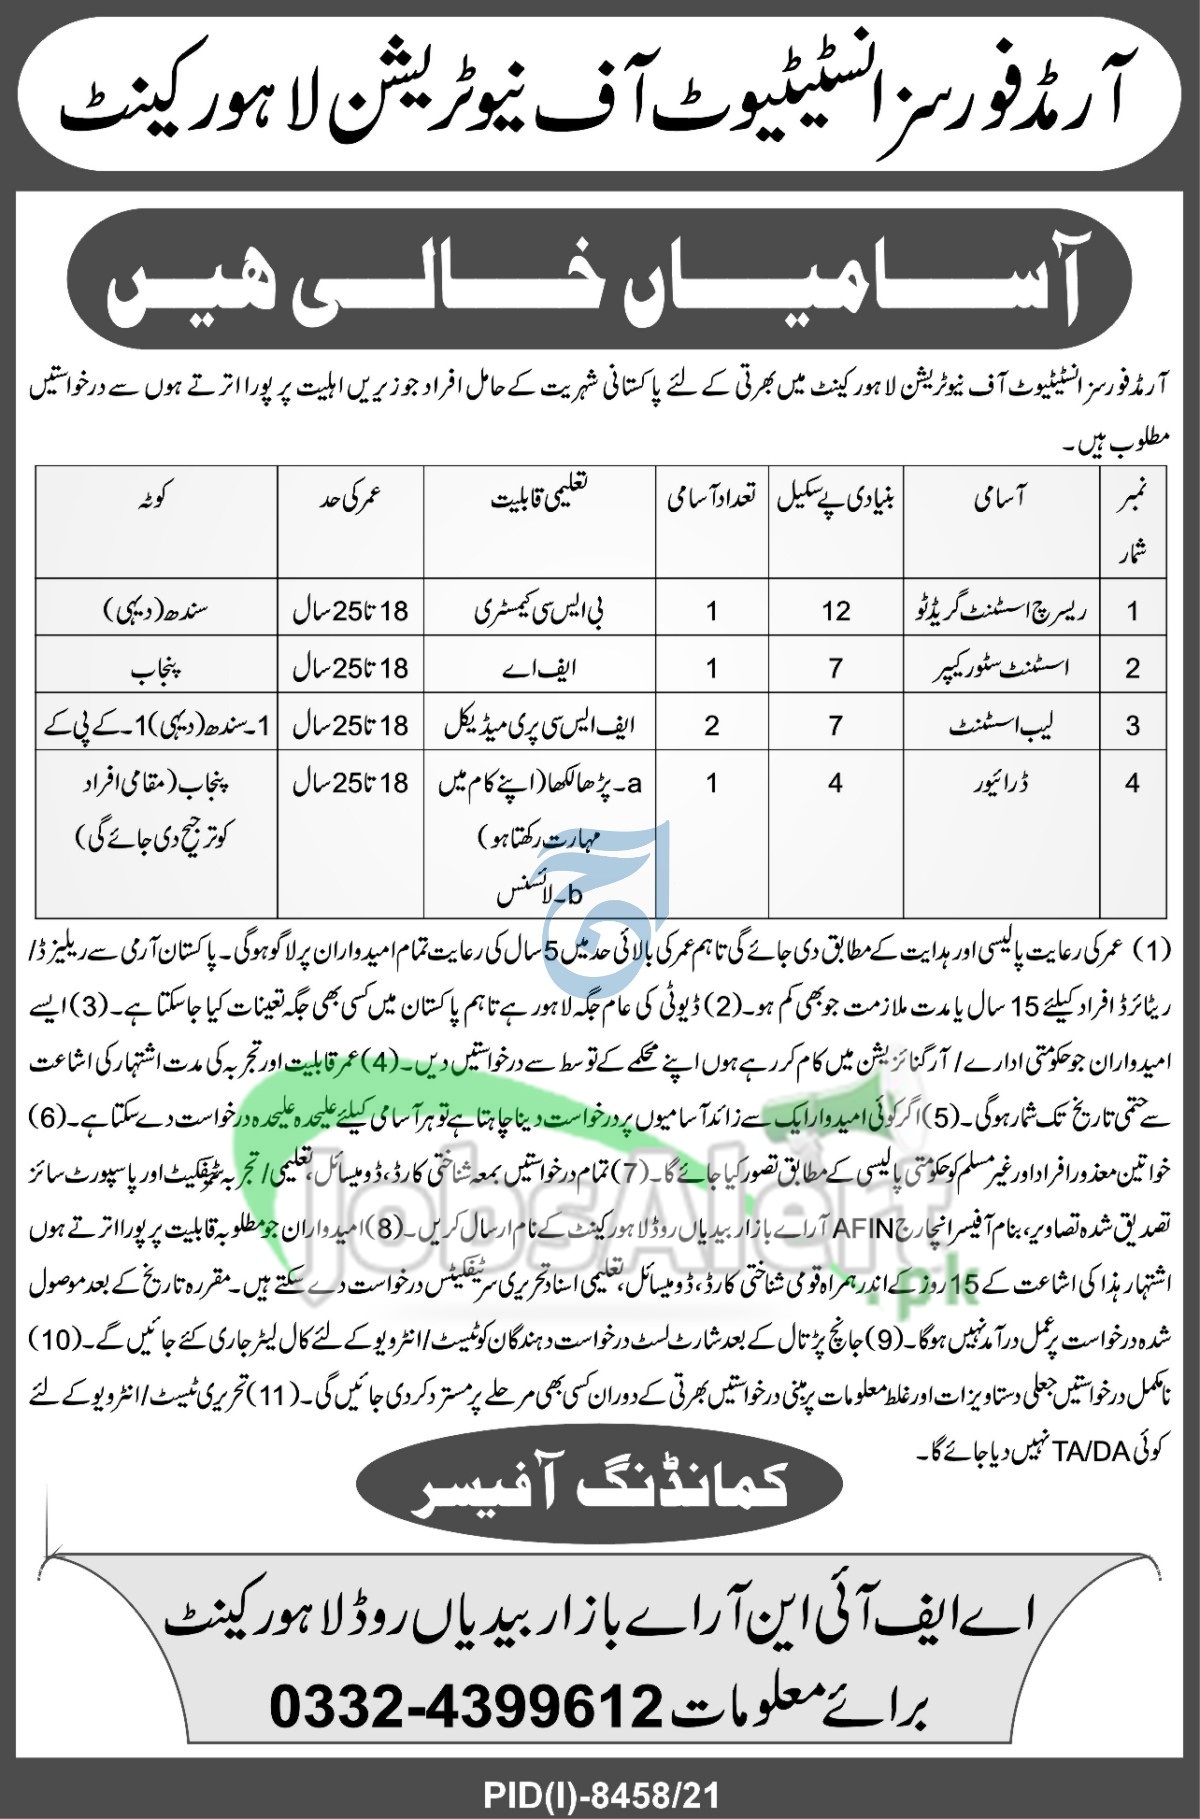 Armed Forces Institute of Nutrition Lahore Jobs